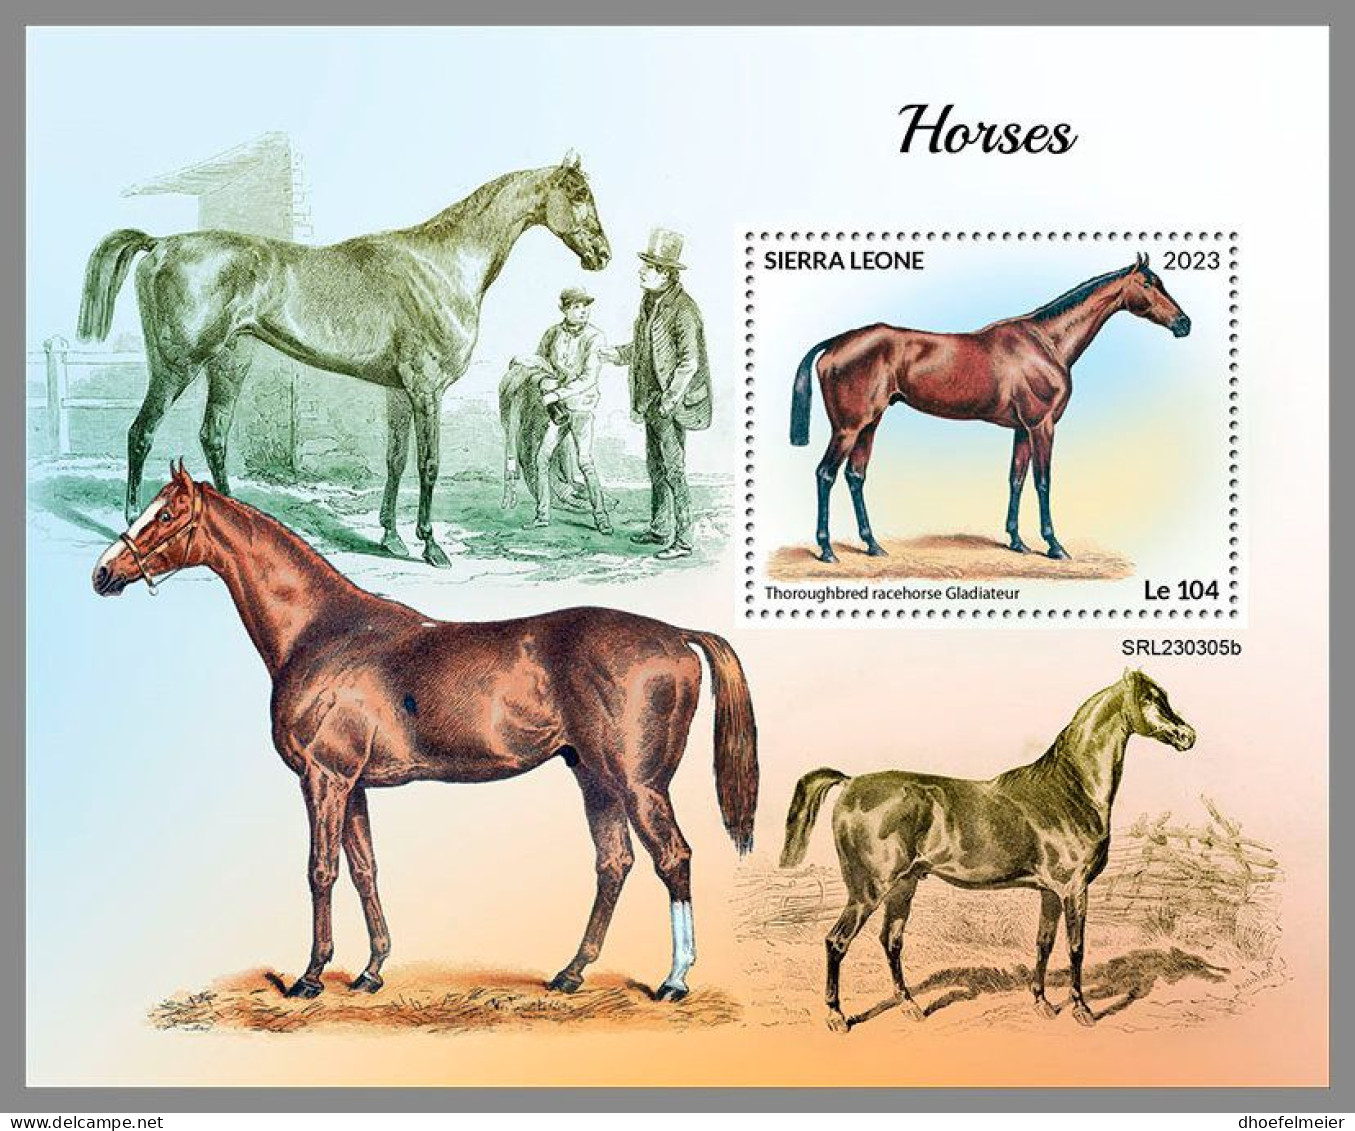 SIERRA LEONE 2023 MNH Horses Pferde S/S – OFFICIAL ISSUE – DHQ2418 - Cavalli